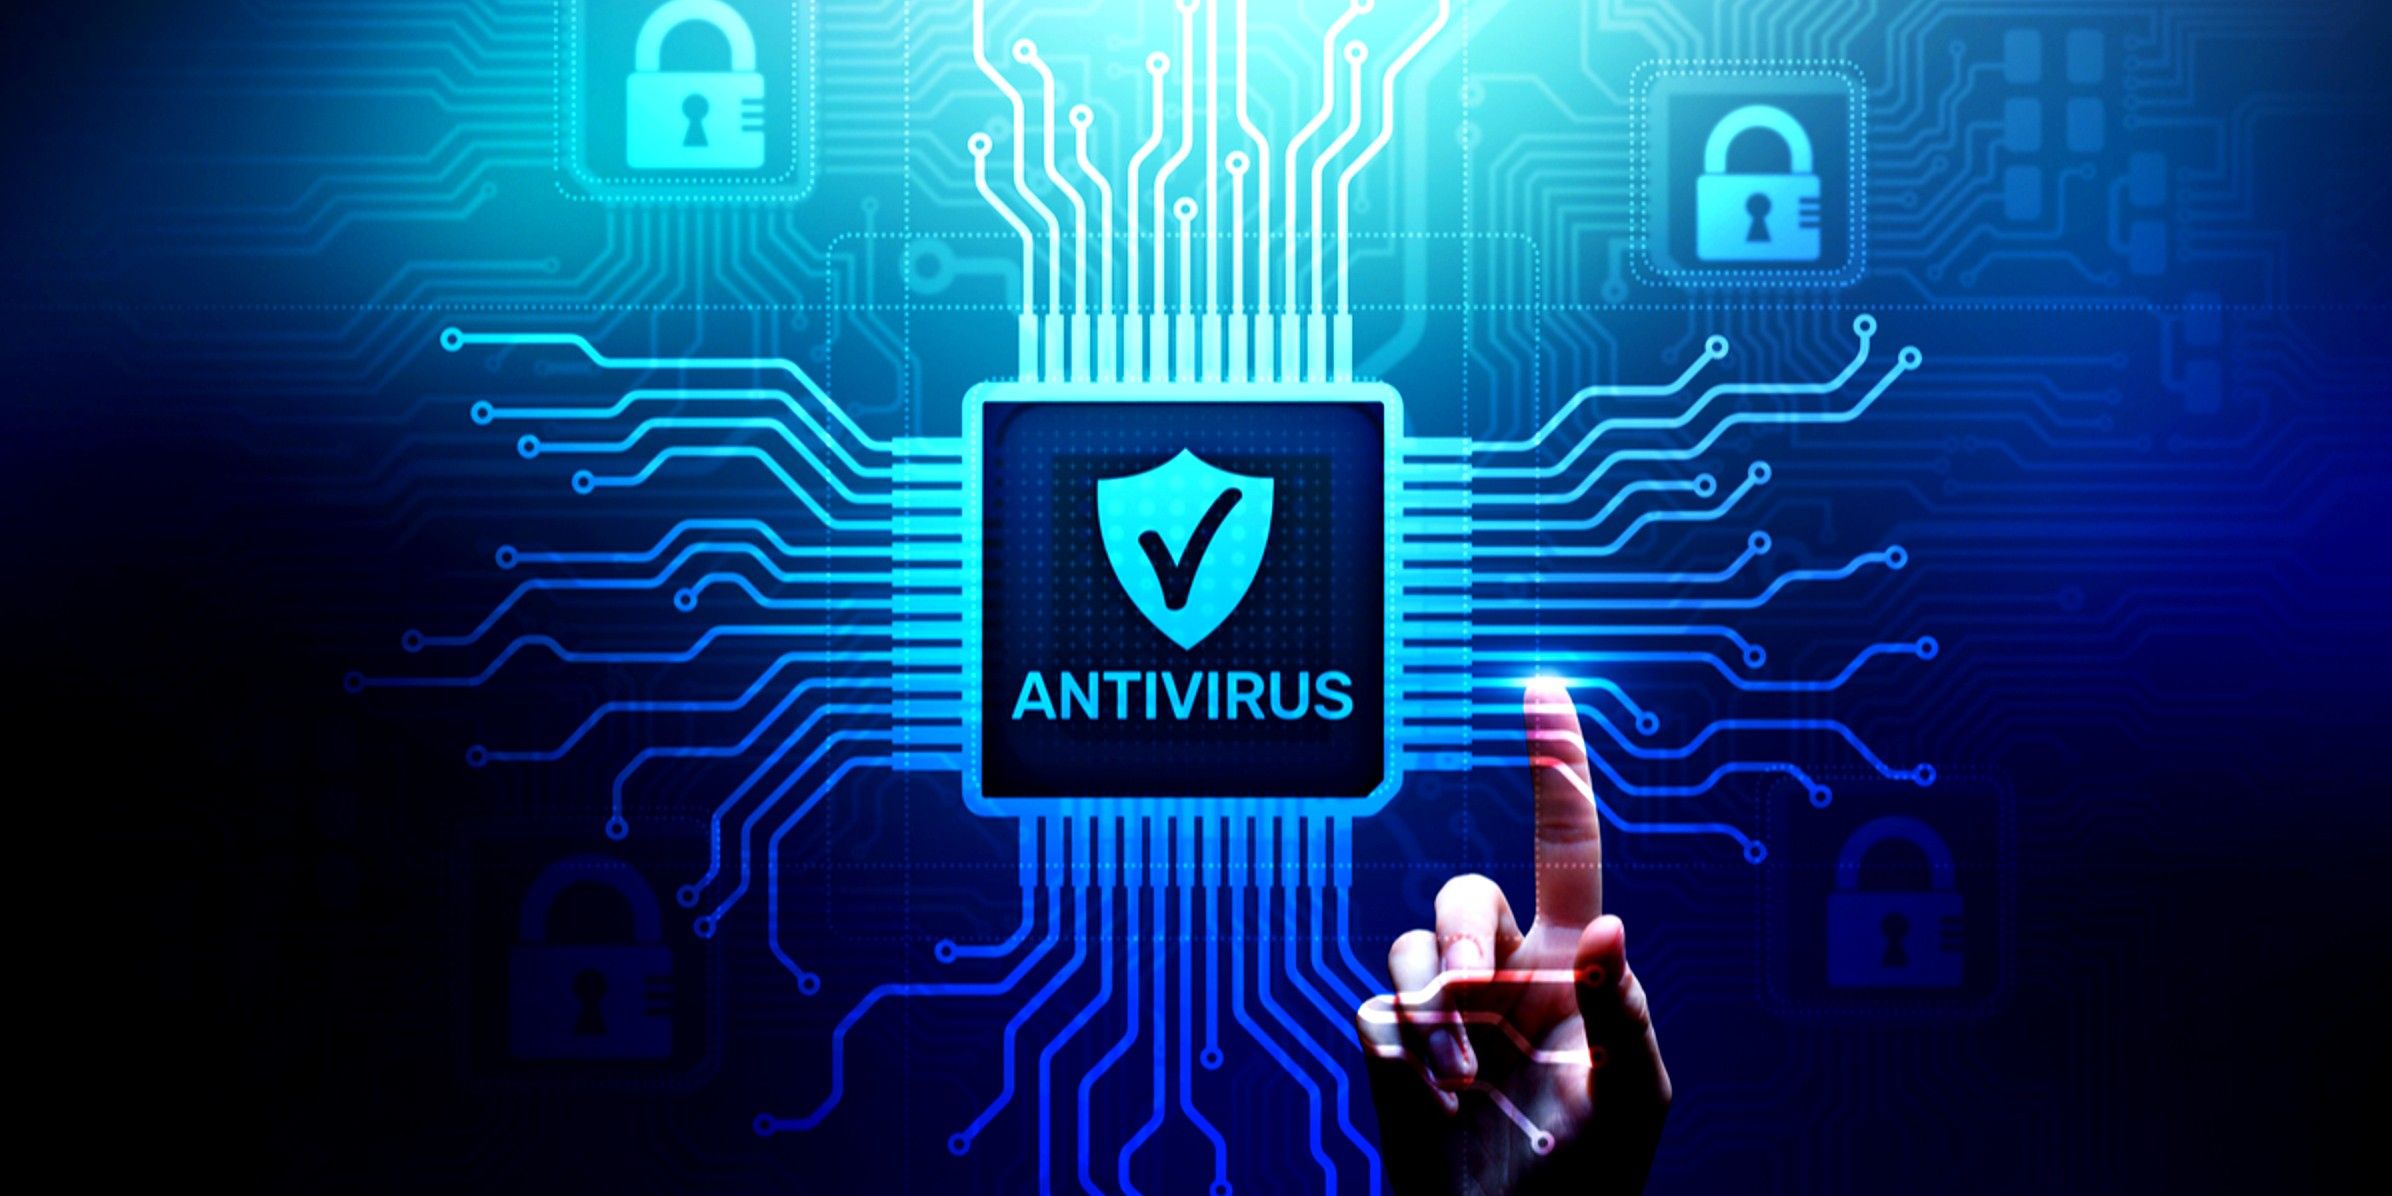 Abstract art, "ANTIVIRUS" text below shield with checkmark, on a microchip with blue circuitry, and a finger touching the circuit